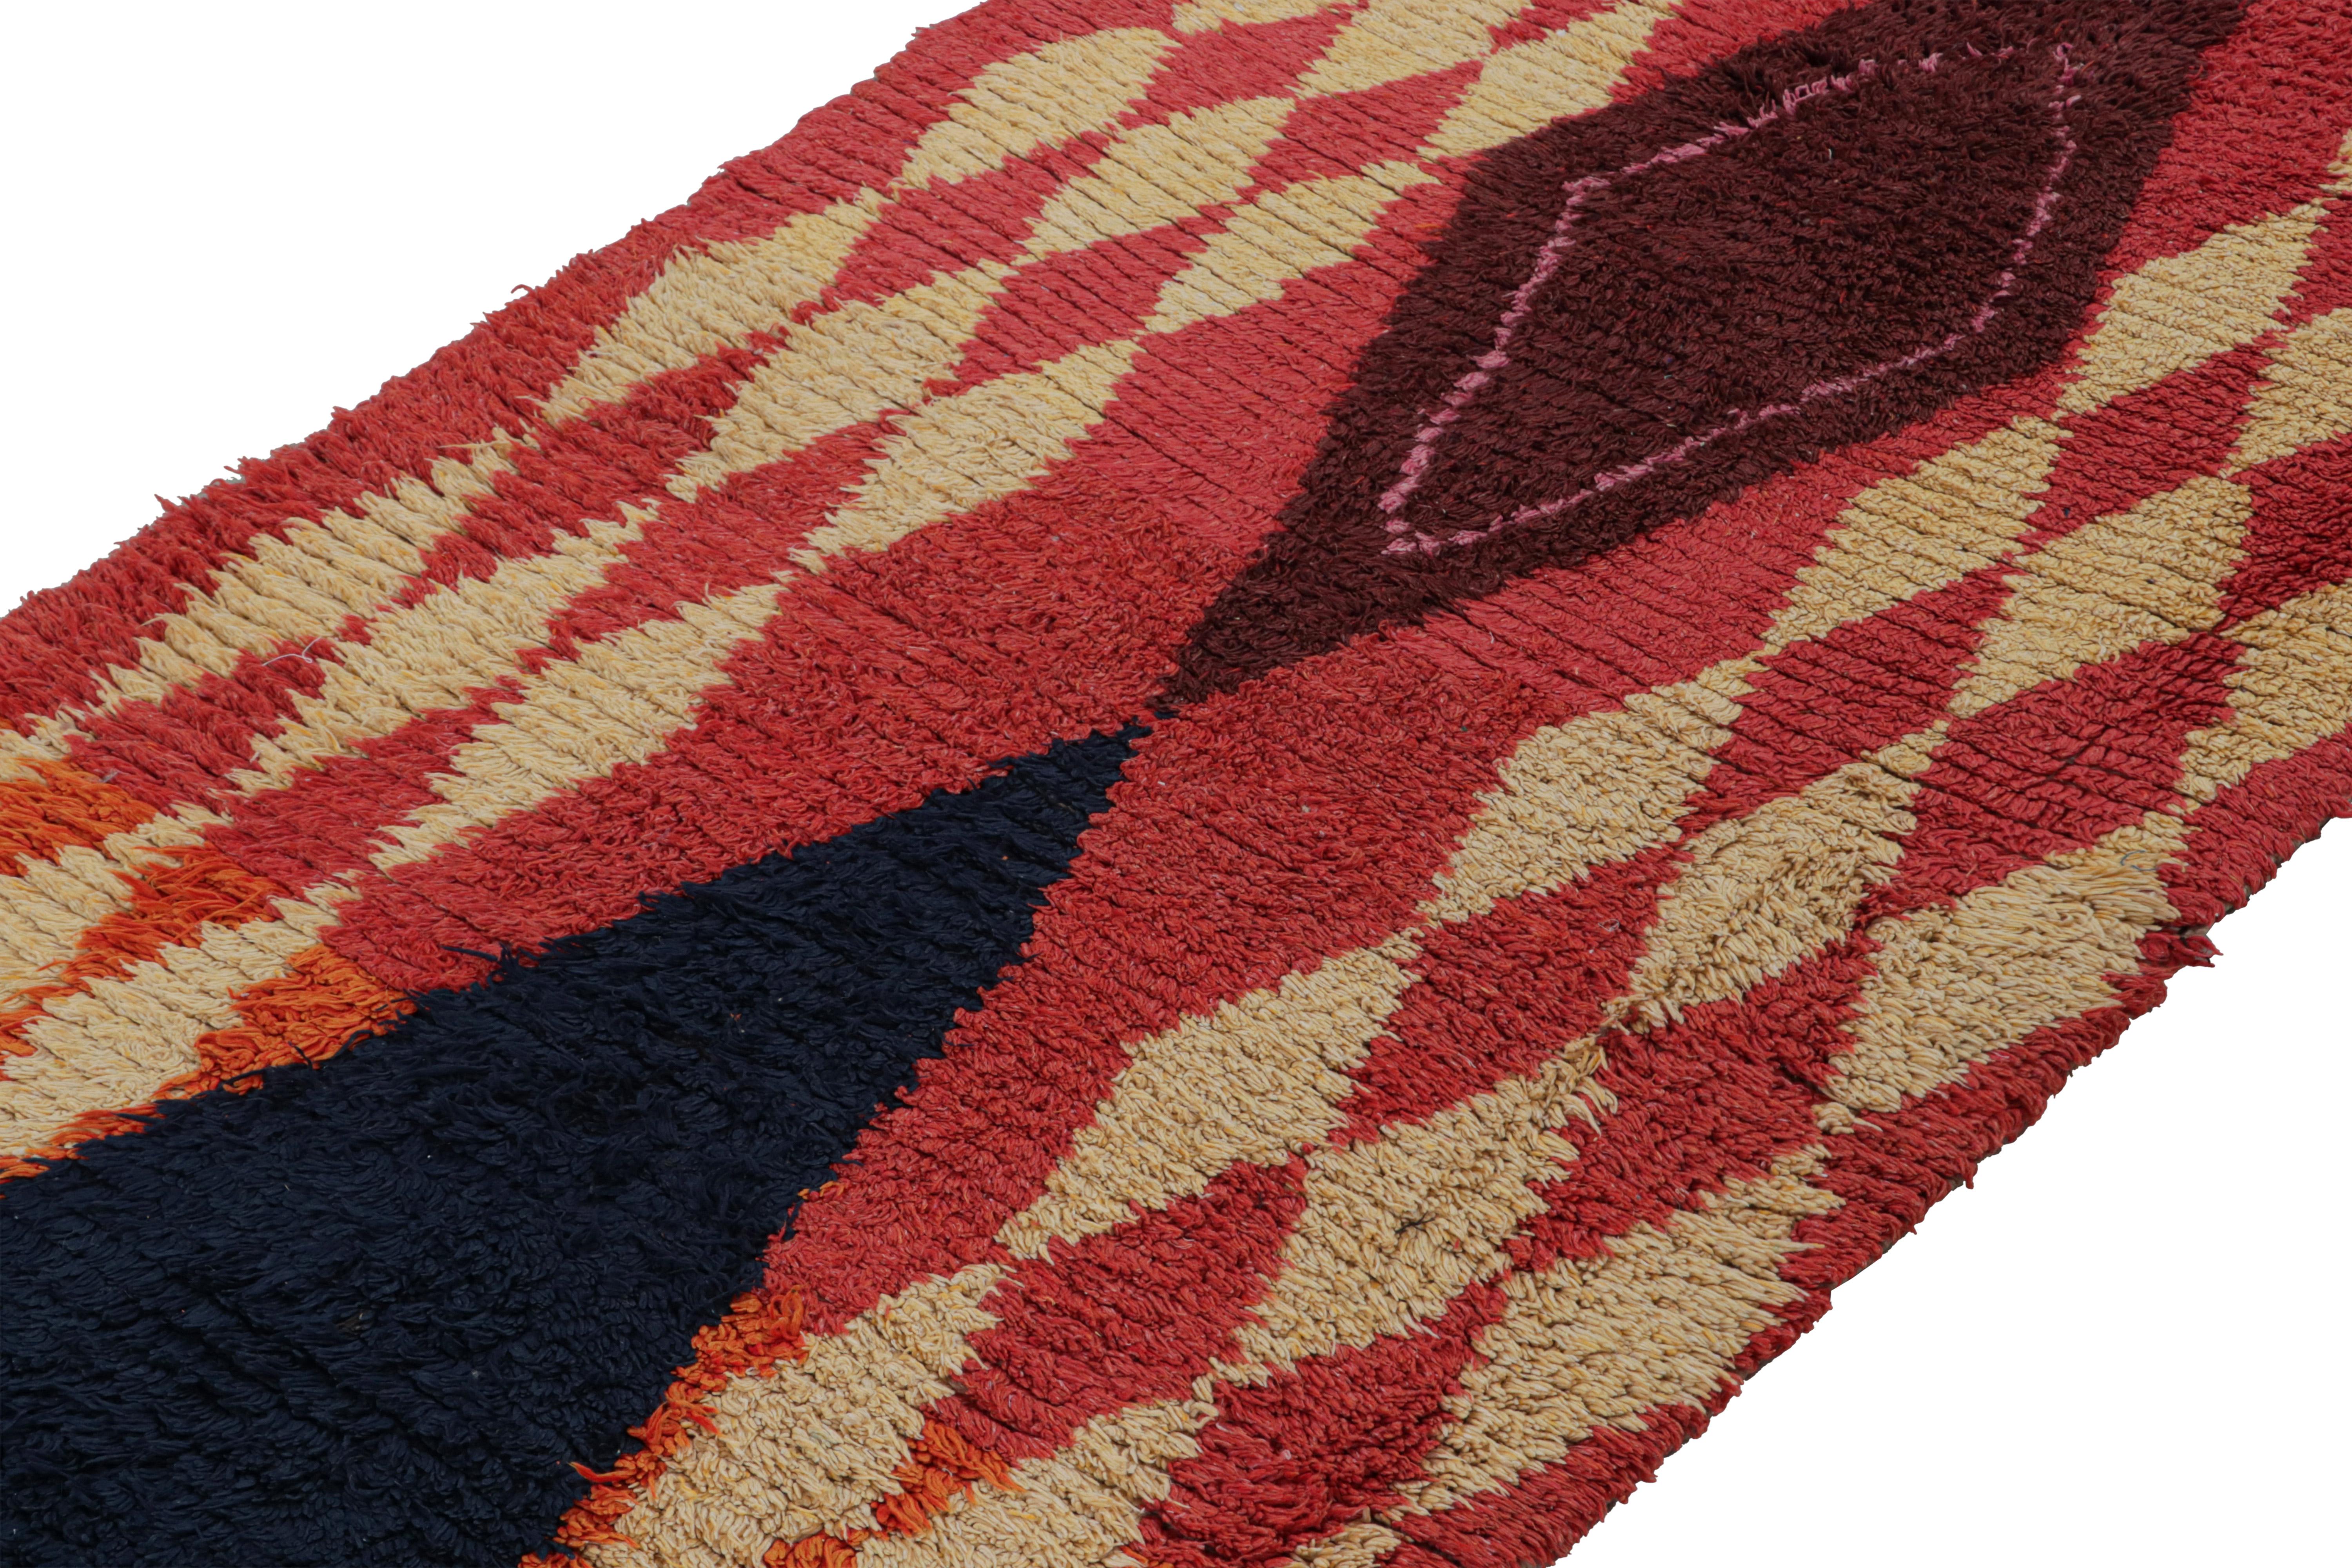 1950s Azilal Moroccan runner rug in Polychromatic Tribal Patterns by Rug & Kilim In Good Condition For Sale In Long Island City, NY